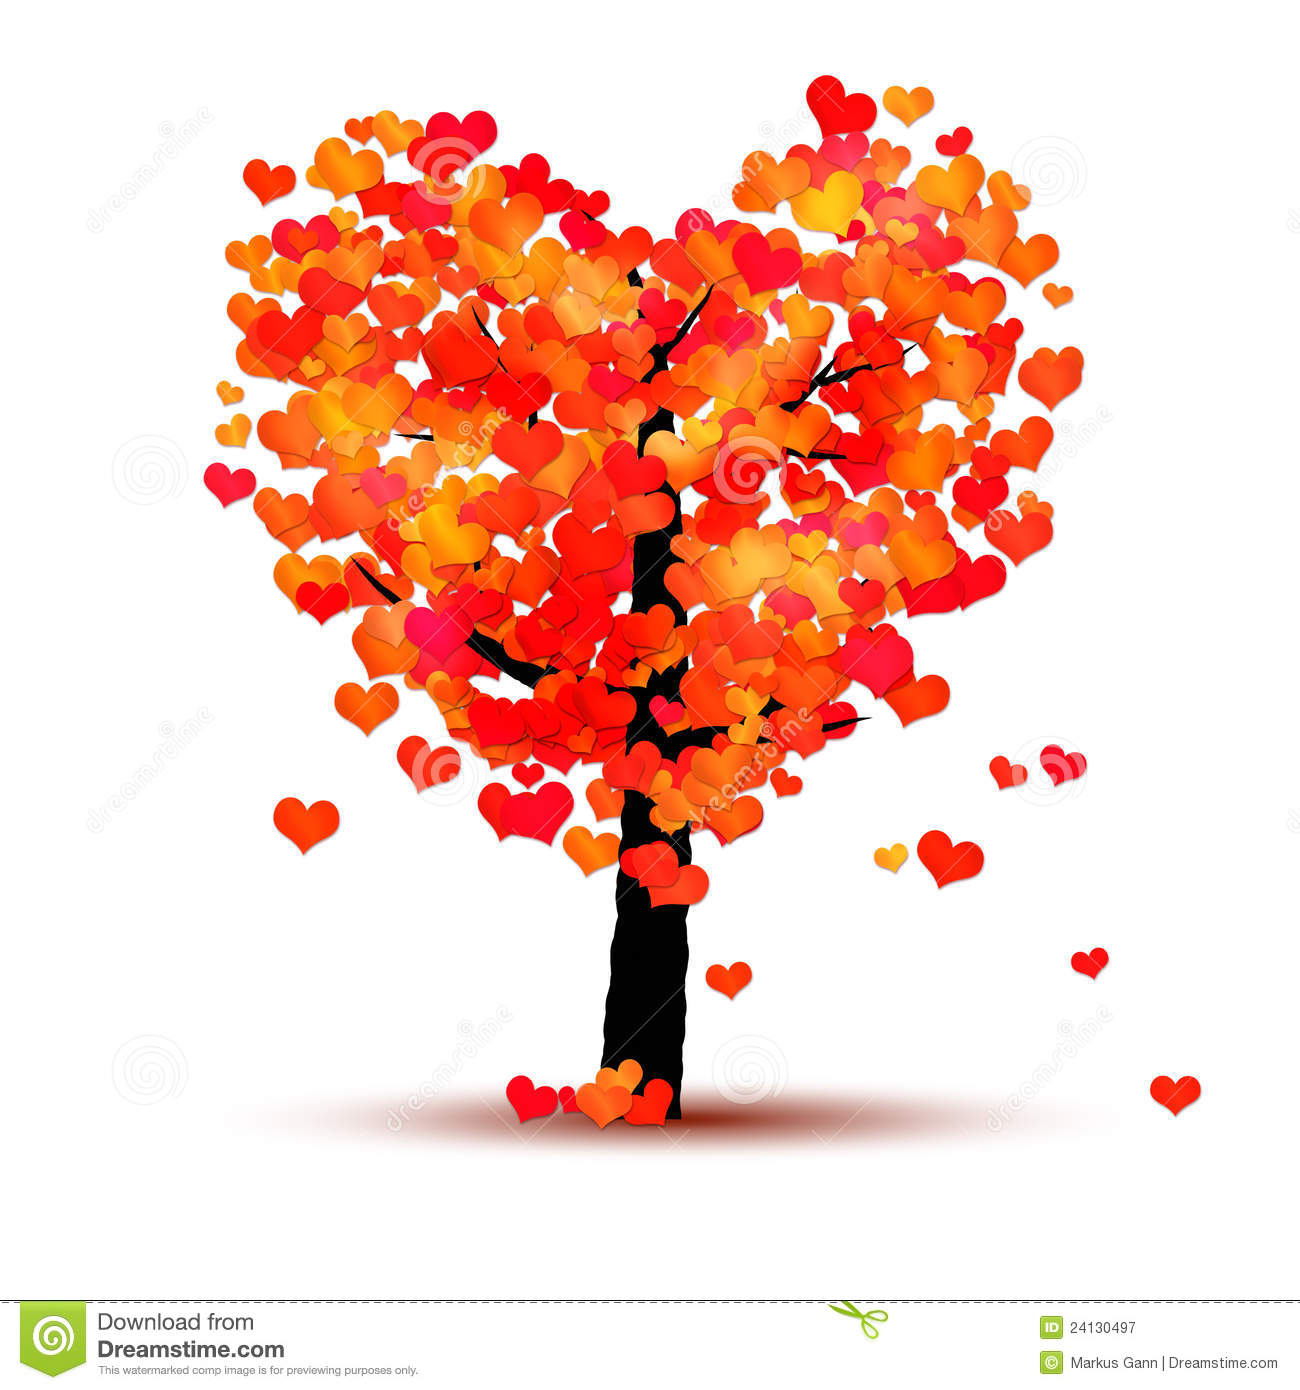 An Image Of A Red Tree With Hearts As Leaf